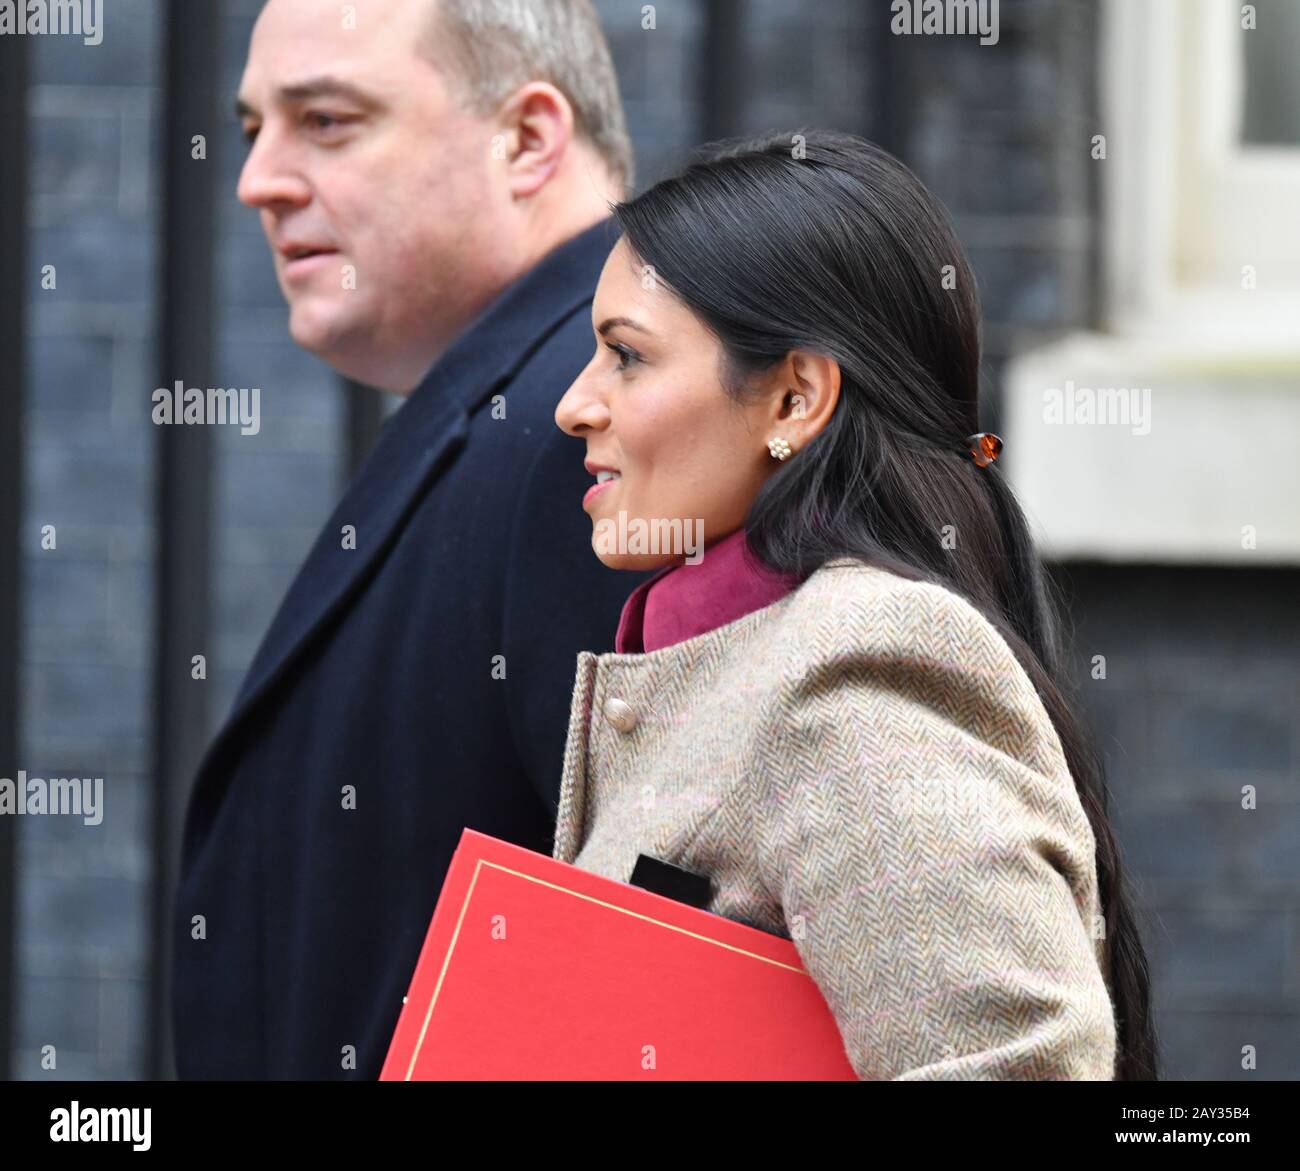 Downing Street, London, UK. 14th February 2020. Ben Wallace MP, Secretary of State for Defence in Downing Street accompanied by Priti Patel MP, Home Secretary, for weekly cabinet meeting. Credit: Malcolm Park/Alamy Live News. Stock Photo